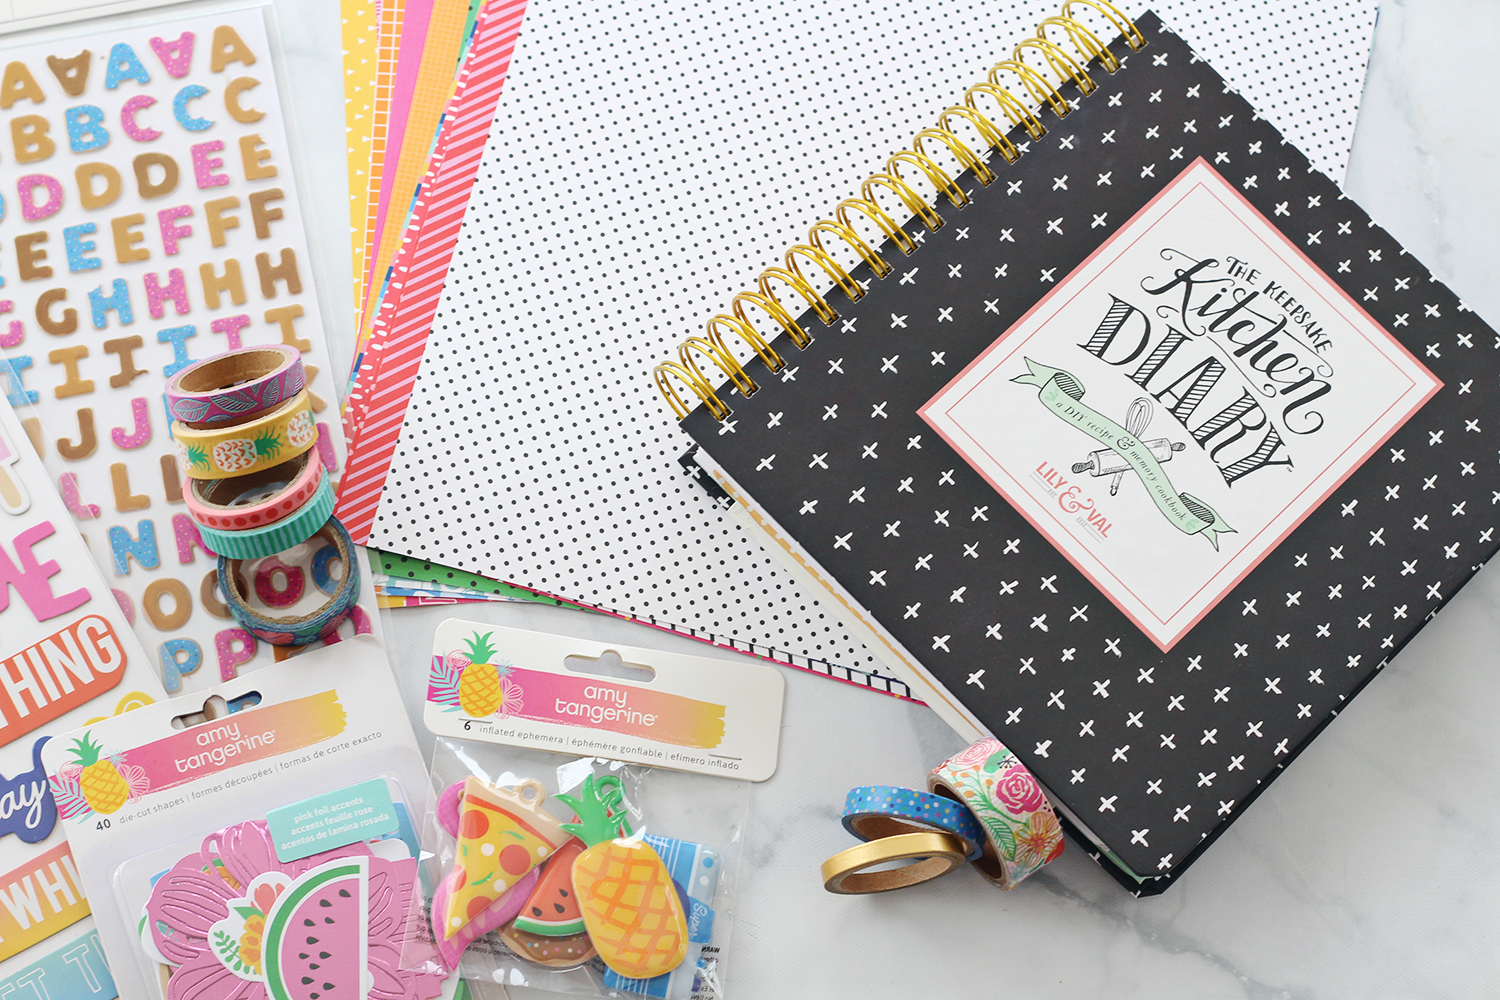 Crafting The Keepsake Kitchen Diary With Amy Tangerine Scrapbook Supplies